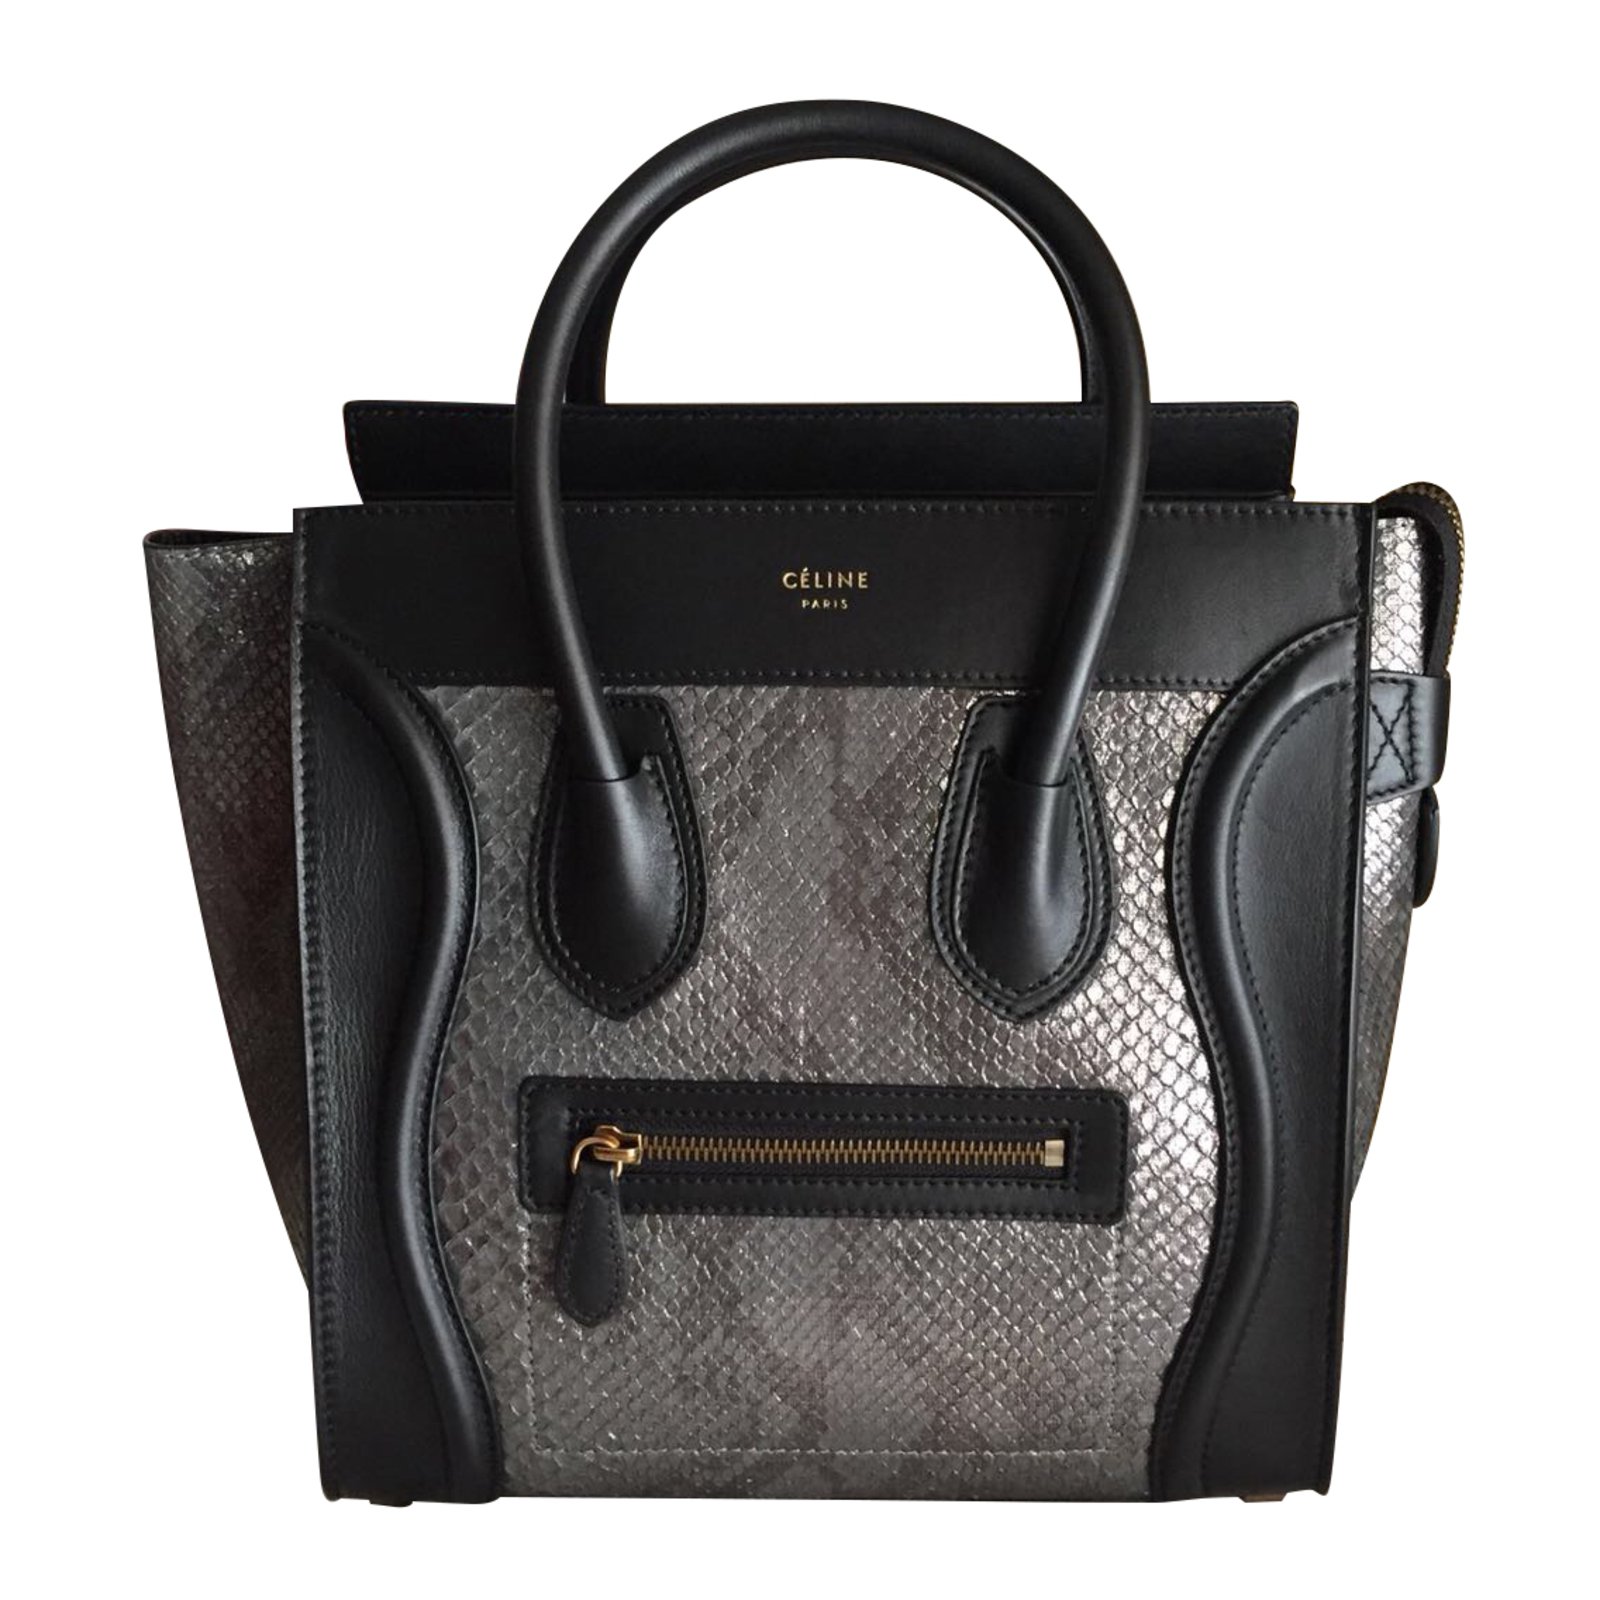 Celine Micro Black Leather Luggage Bag with sling